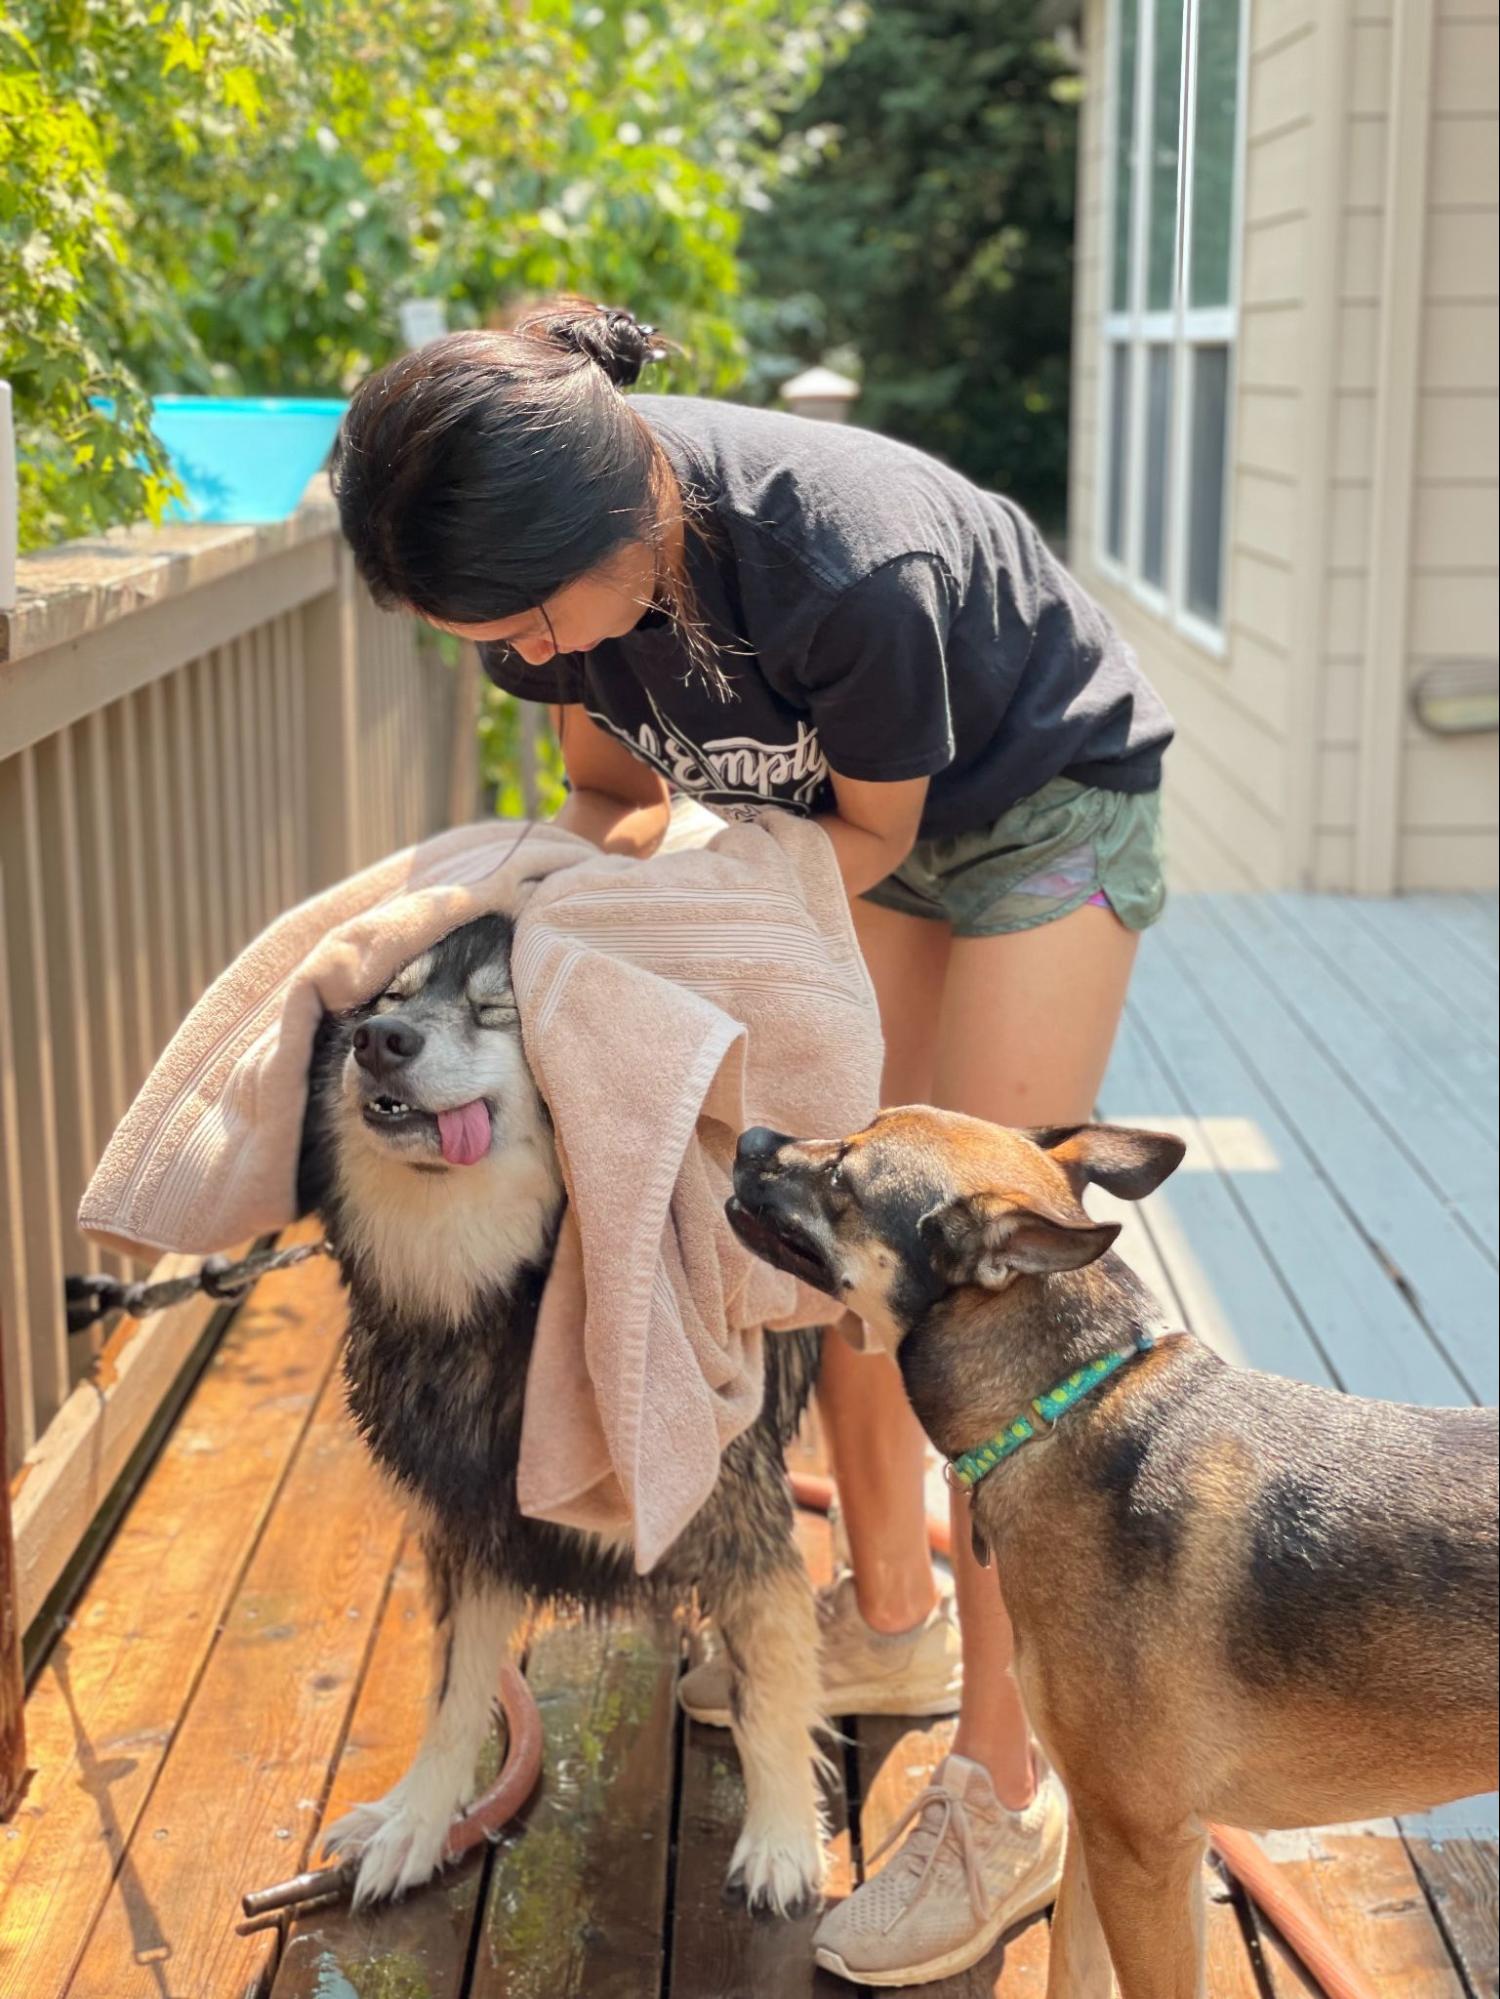 Woman gives her pups a bath to clean fur from allergens from pollen and grass